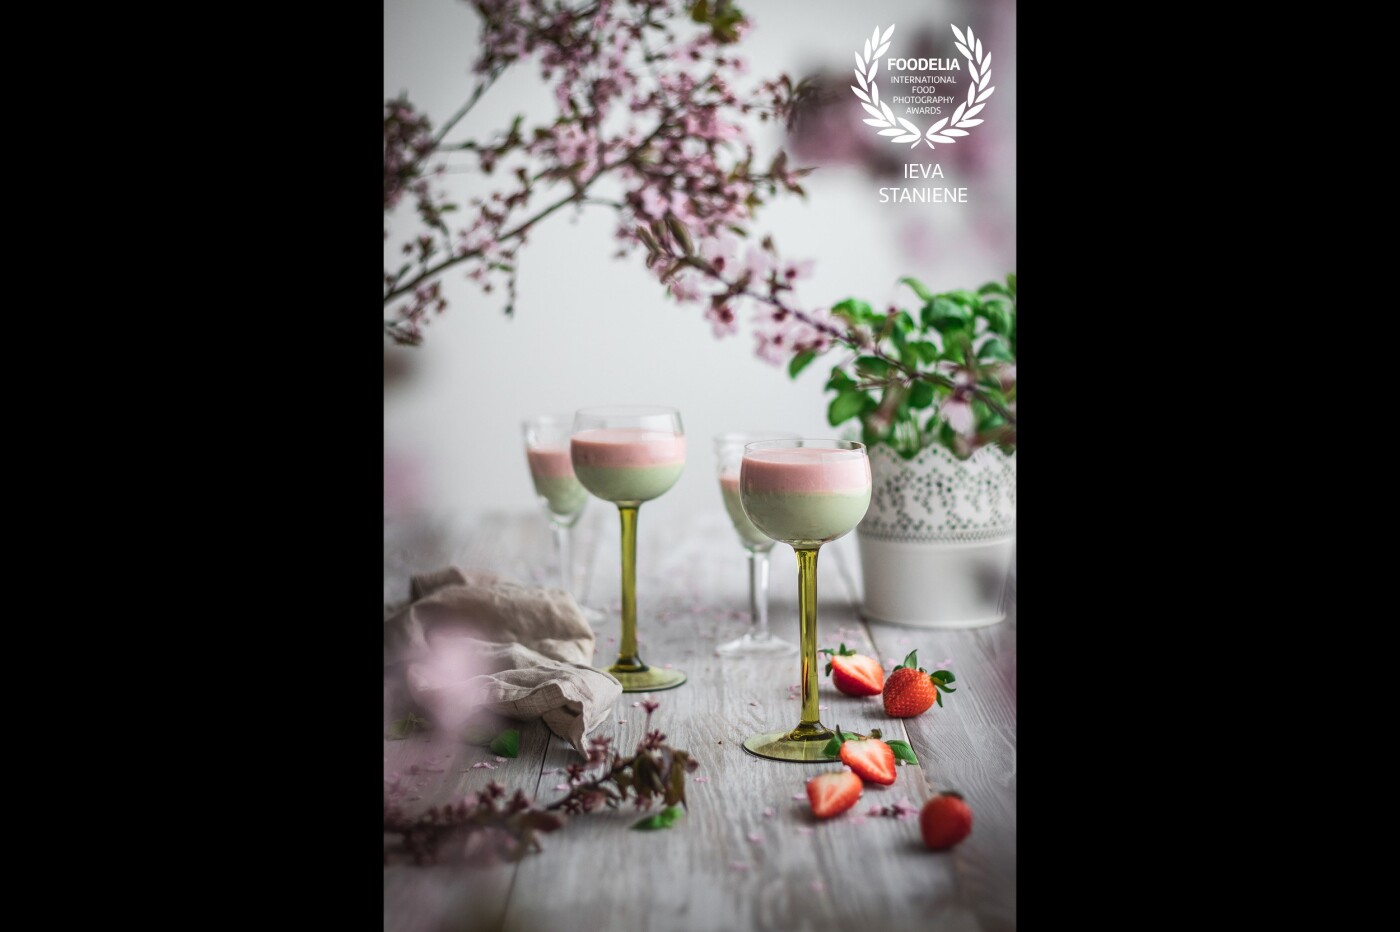 A beautiful, colorful and romantic dessert. The taste of this basil and strawberry panna cotta is great! As for the photo, I think the framing with flowers and subtly contrasting pastel colors are the strengths of it.